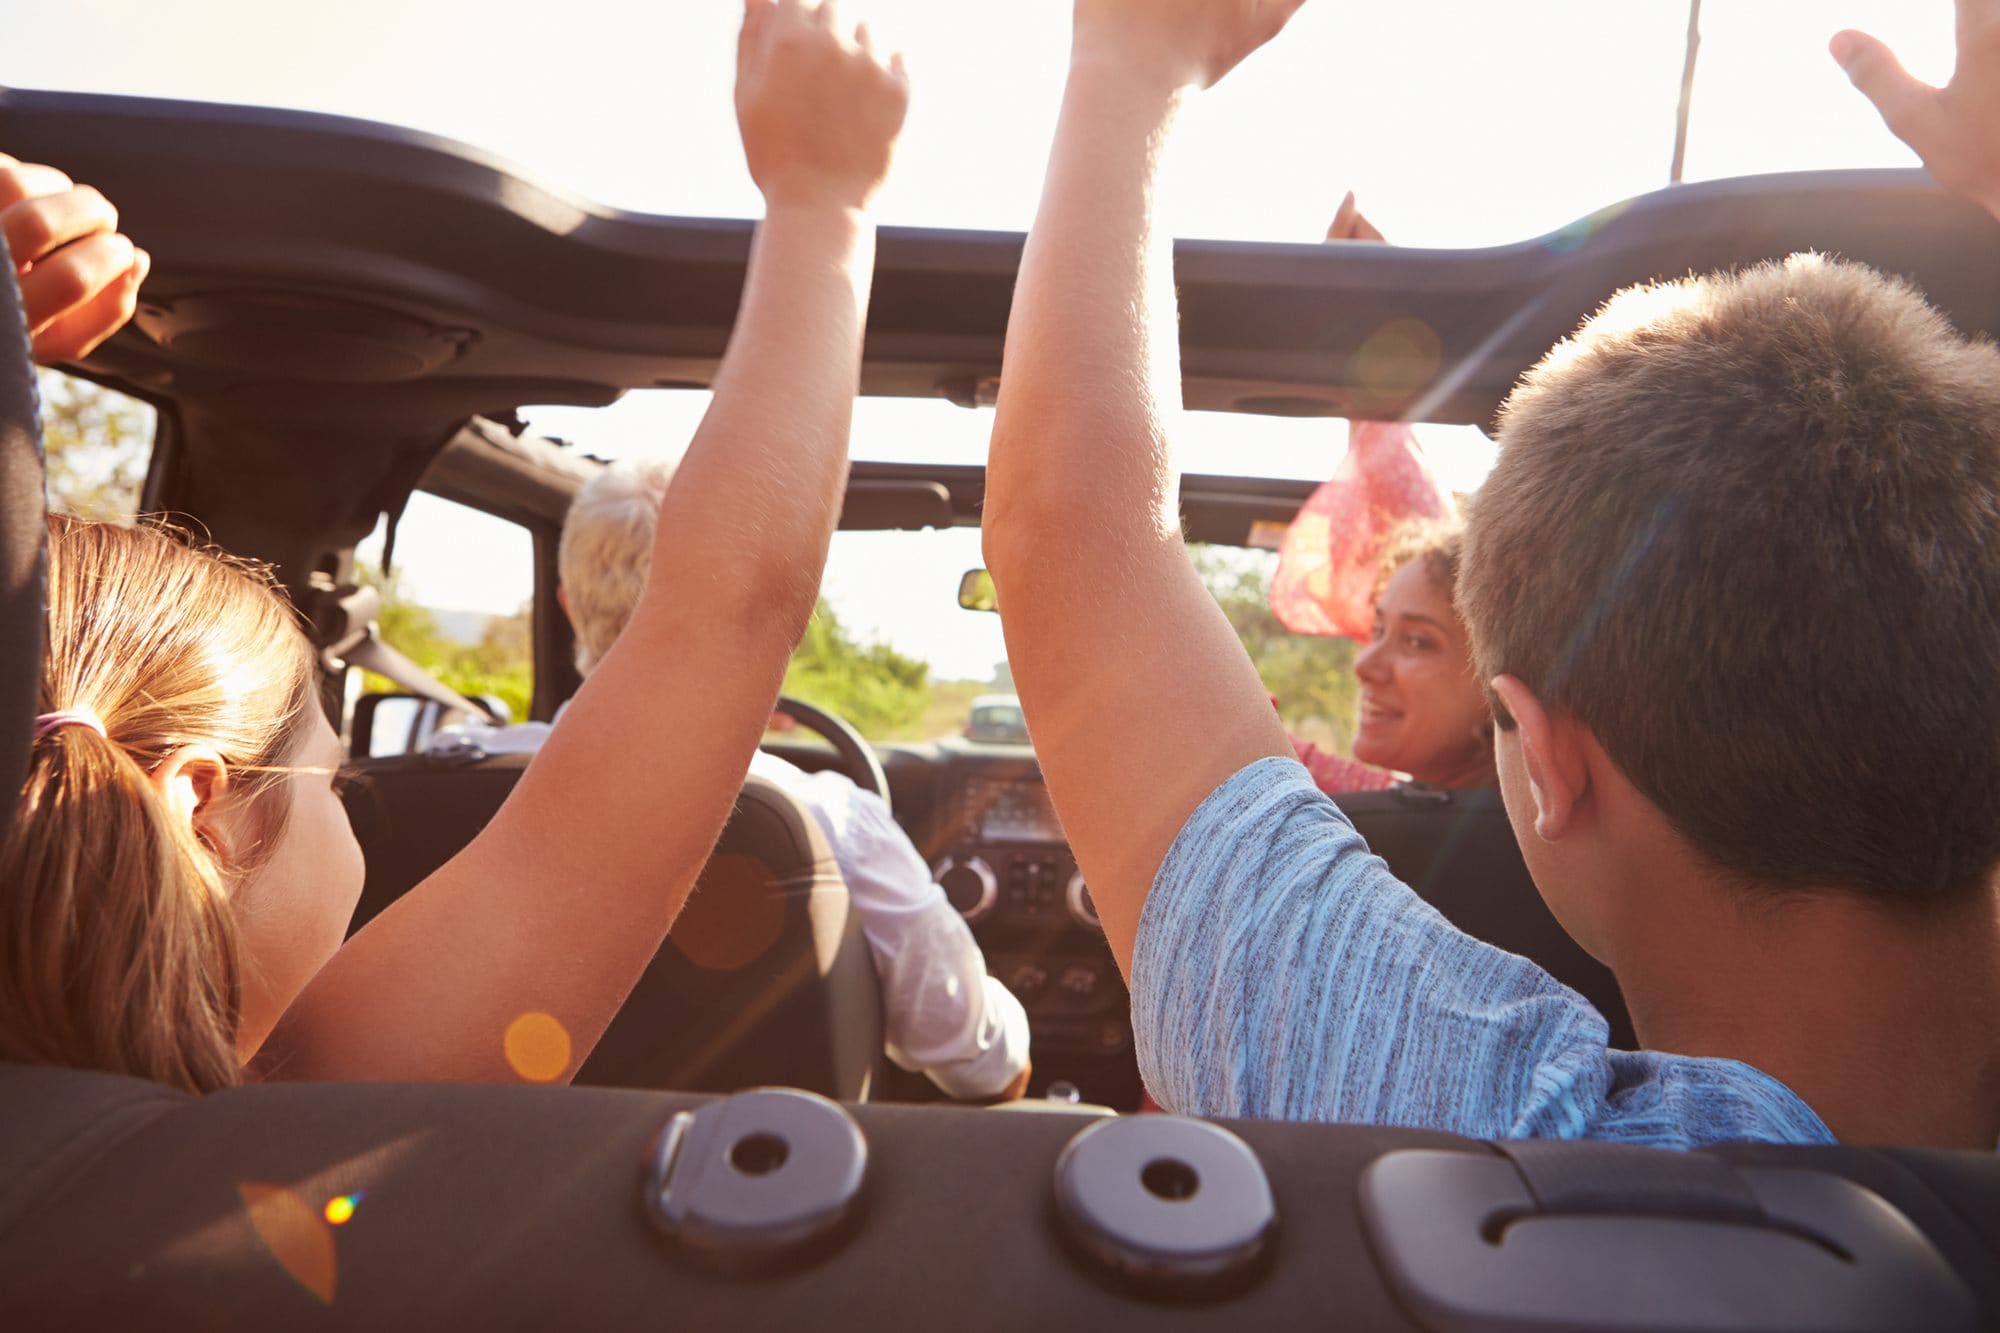 Turn up the tunes on your family road trip